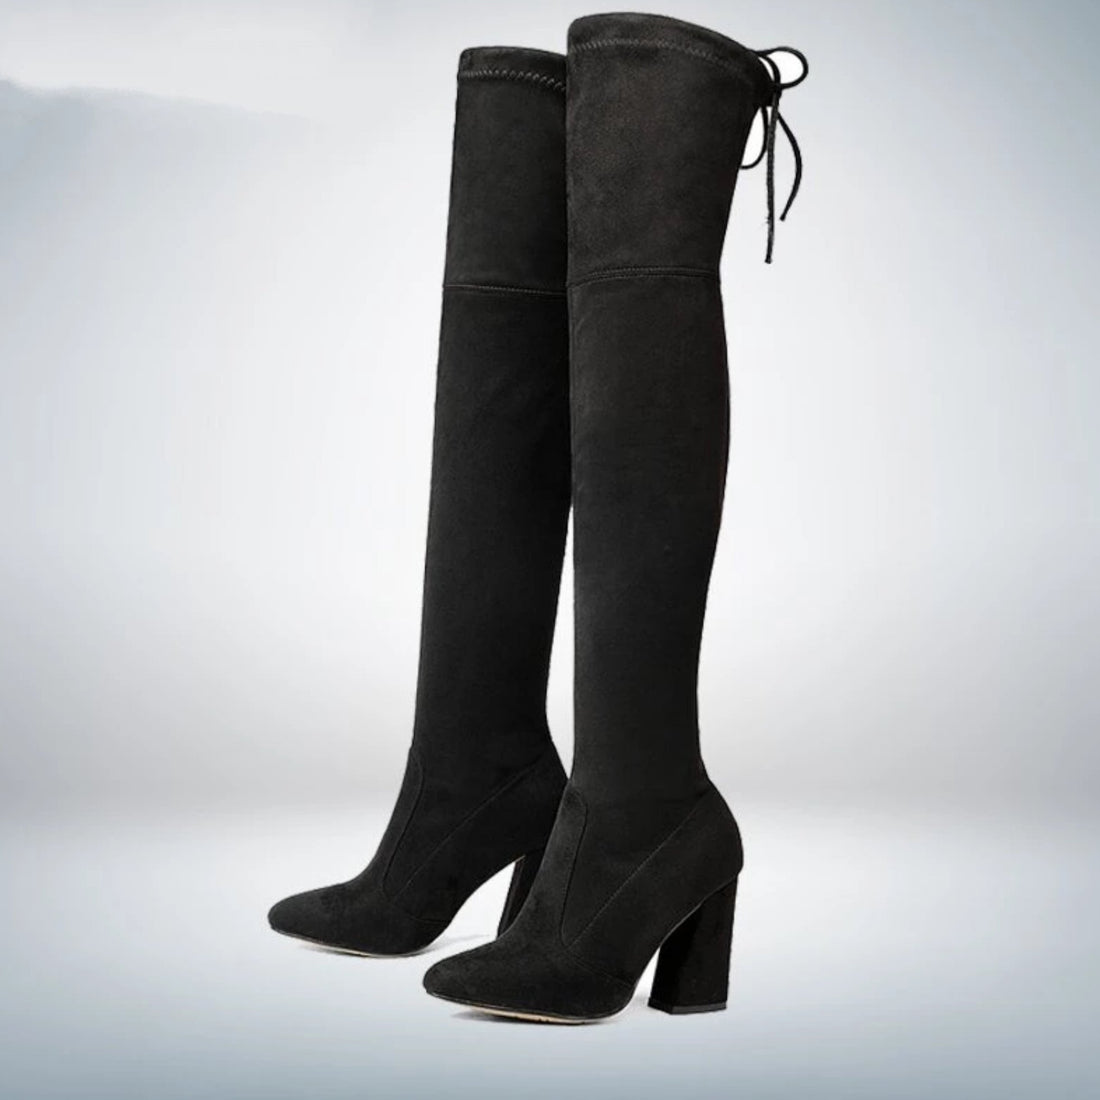 Women's Spring/Autumn Lace-Up High Boots With High Heels